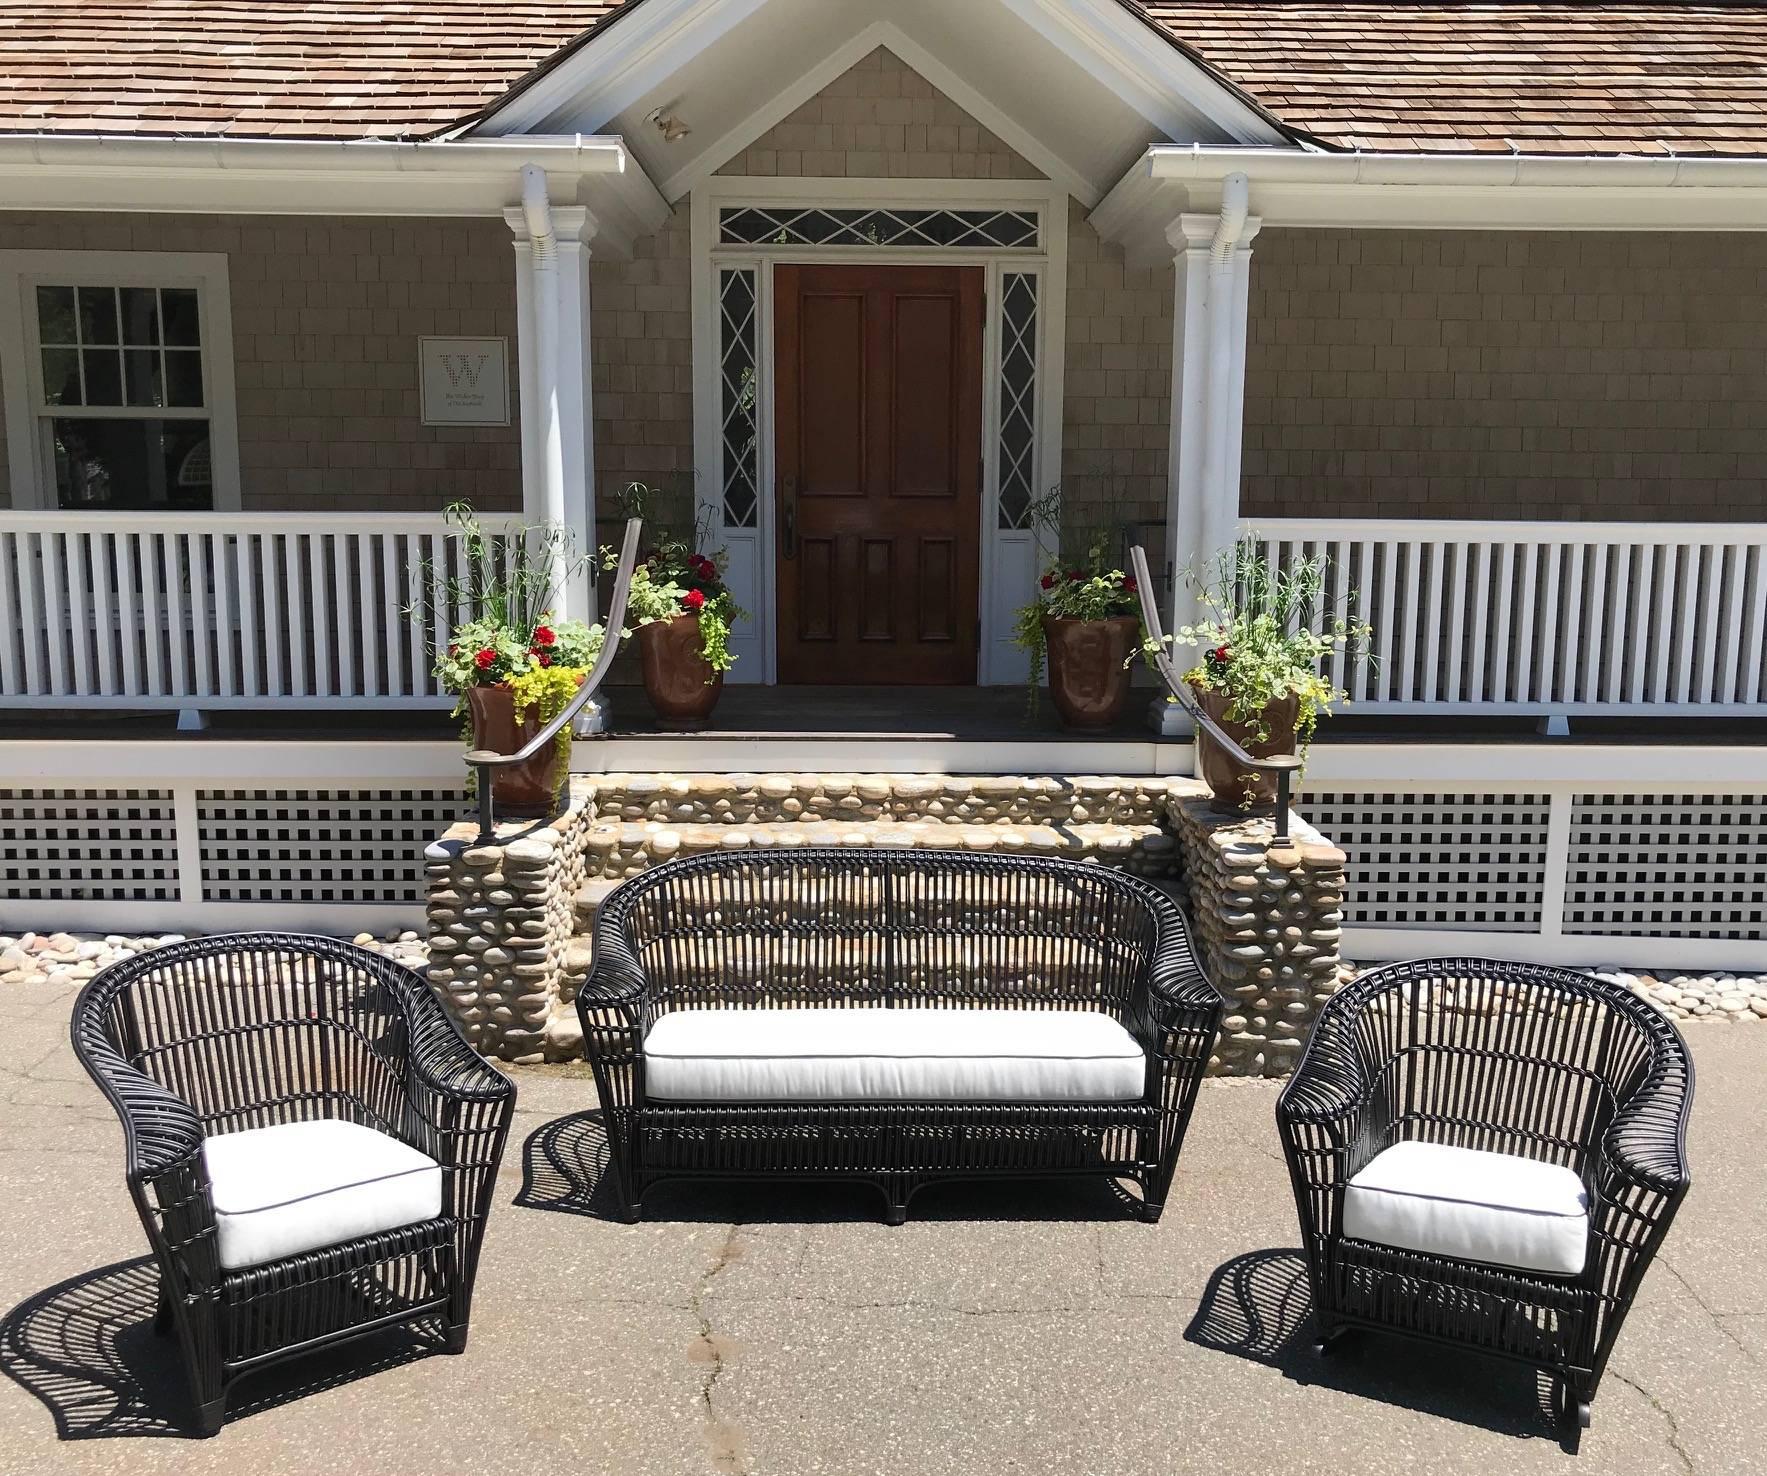 Antique stick rattan porch furniture consisting of a sofa, chair, rocker and sofa table including newly made white sunbrella cushions with black piping. Sofa measures 70